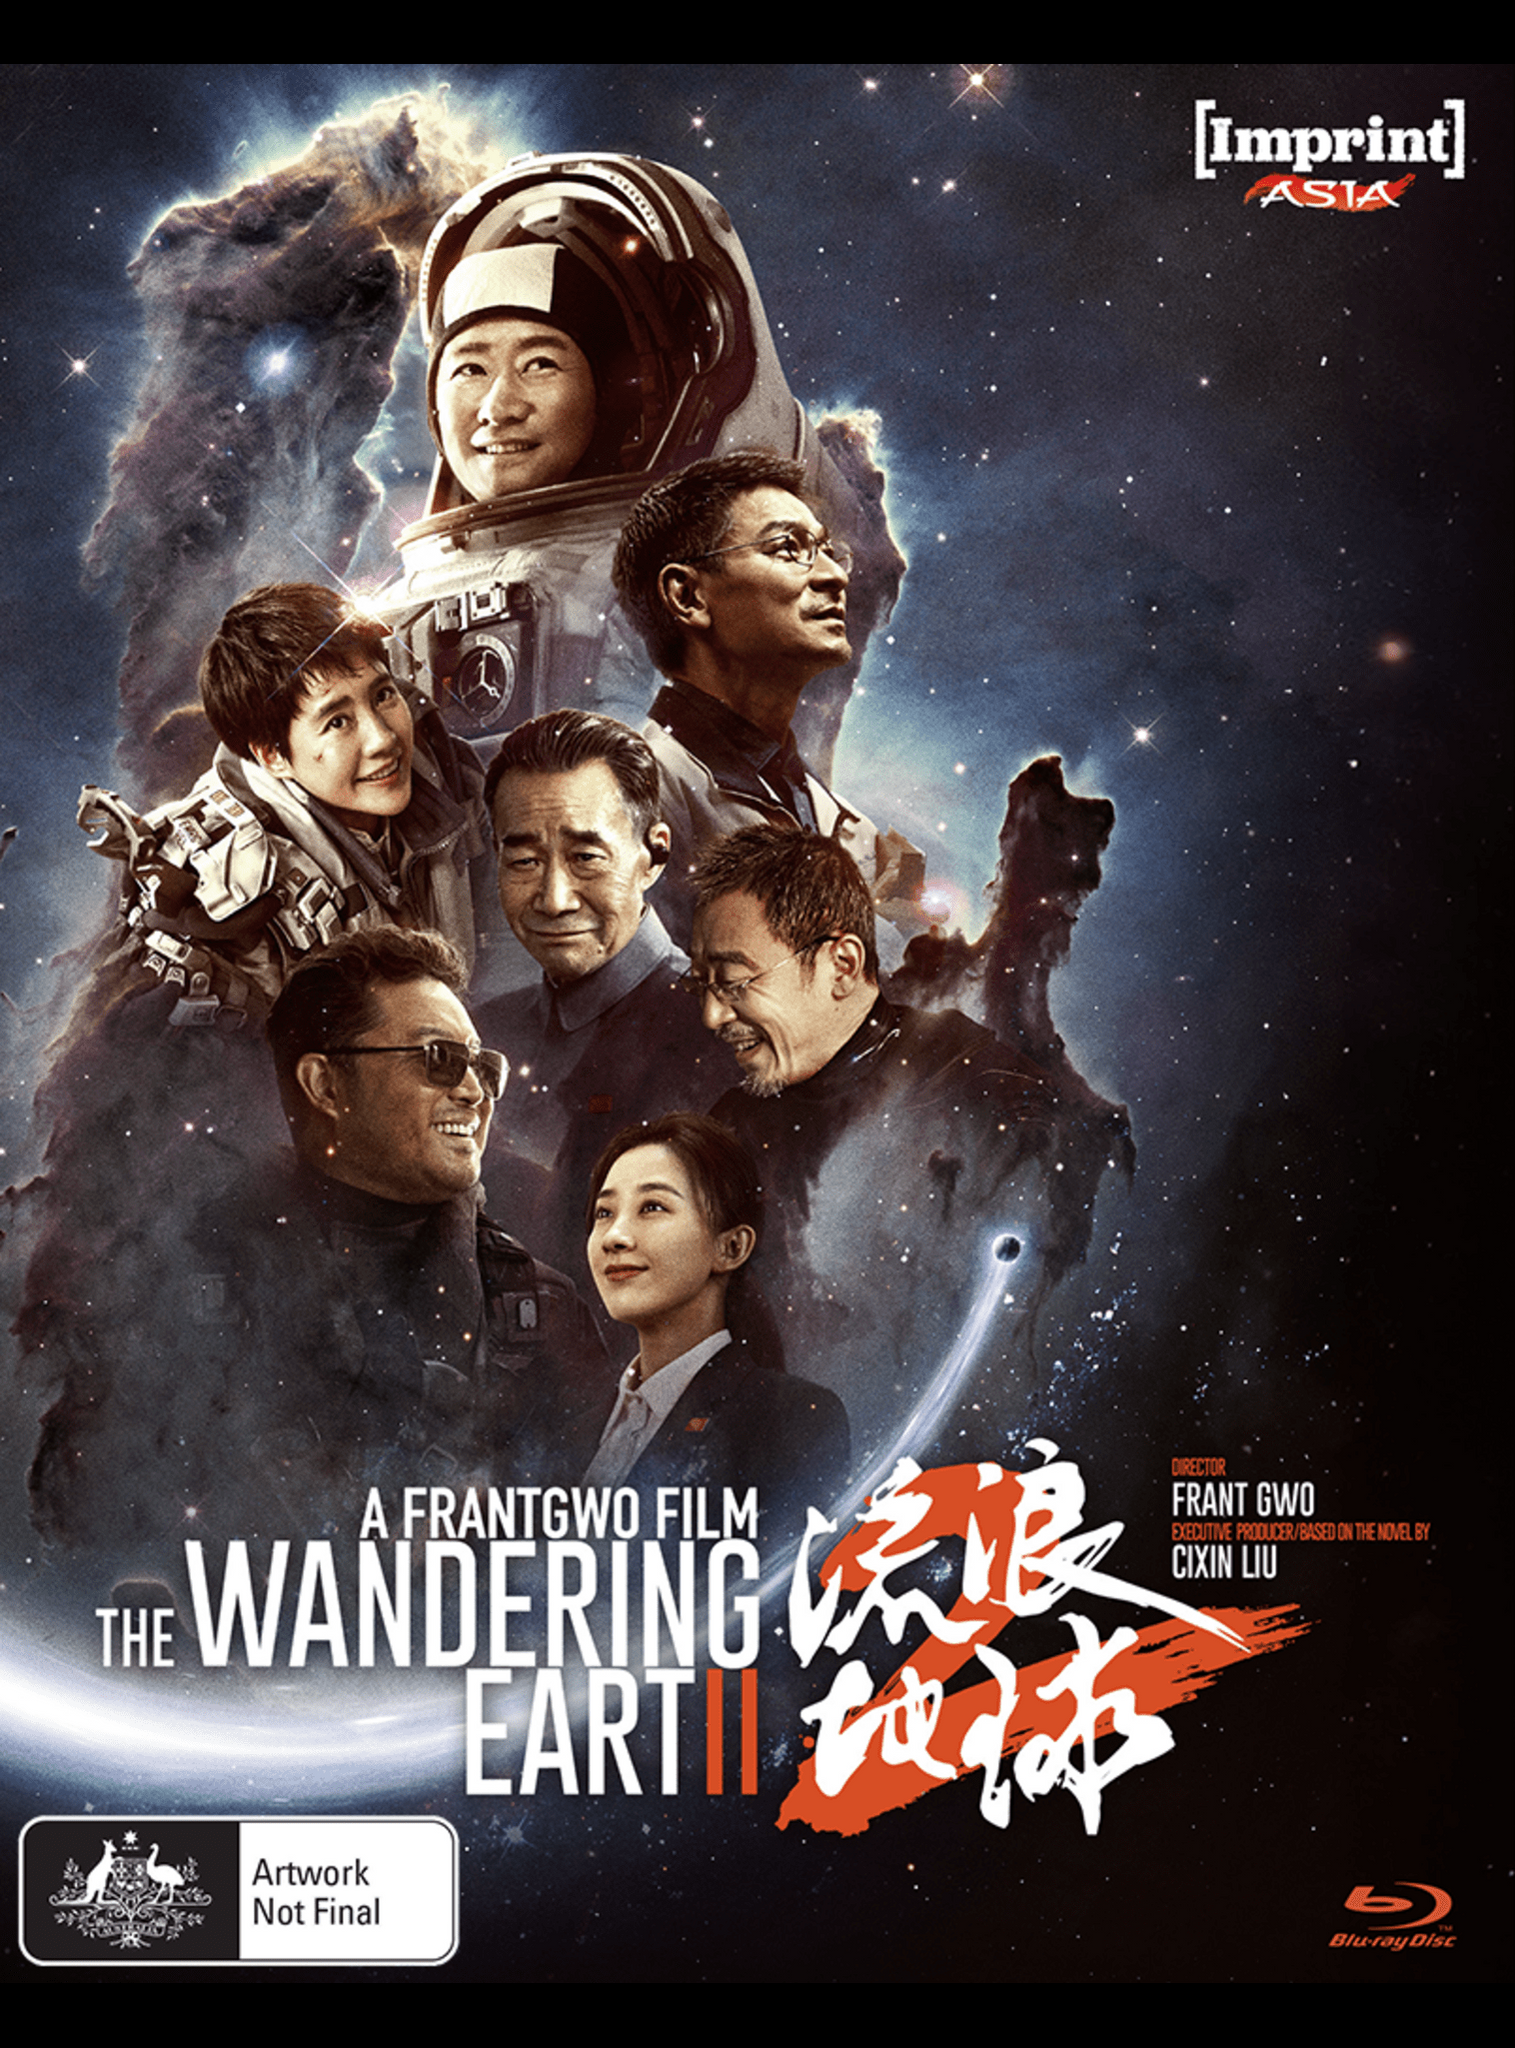 THE WANDERING EARTH II (IMPRINT ASIA COLLECTION #4) - BLU-RAY